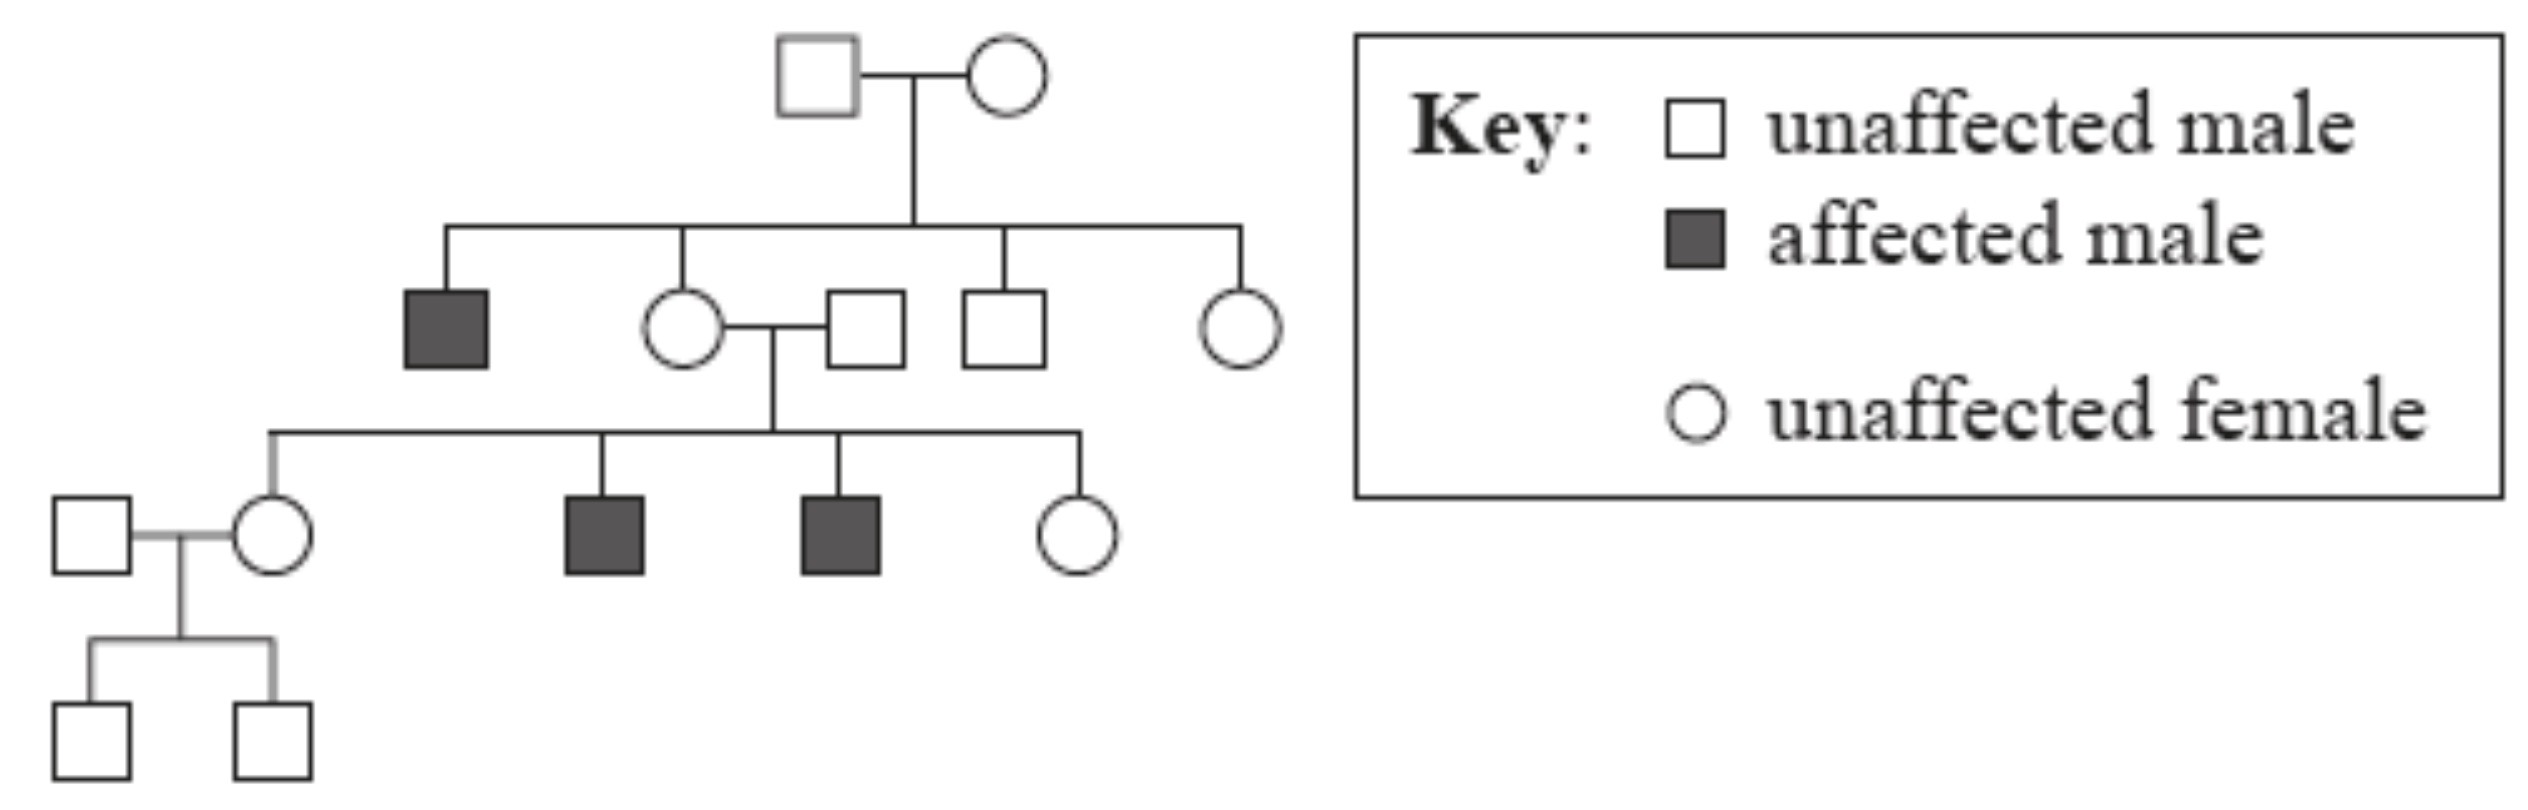 <p>What type of inheritance is shown in this pedigree chart?</p>